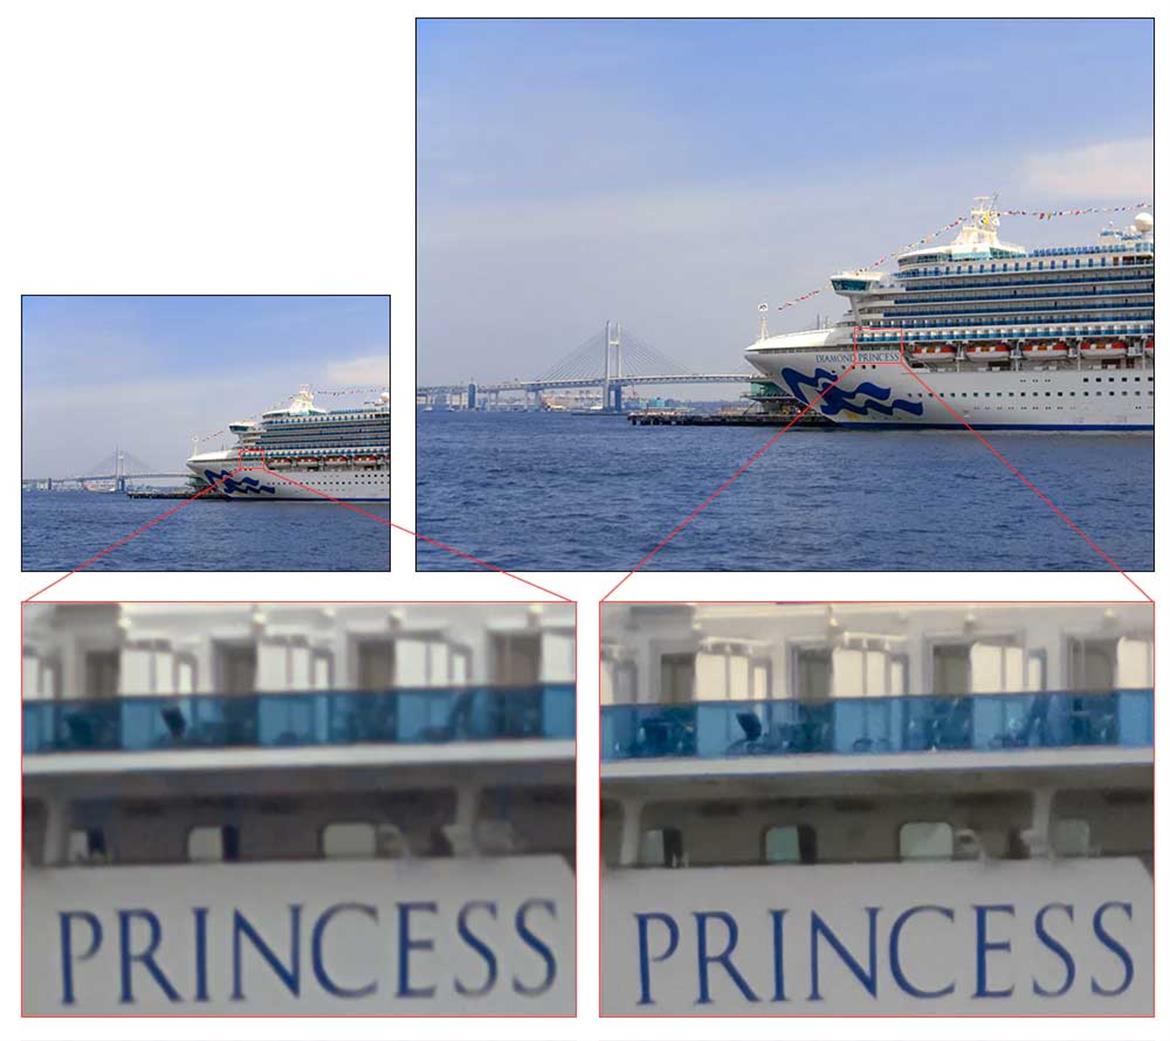 Sony's IMX586 Stacked CMOS Smartphone Image Sensor Packs 48MP Resolution